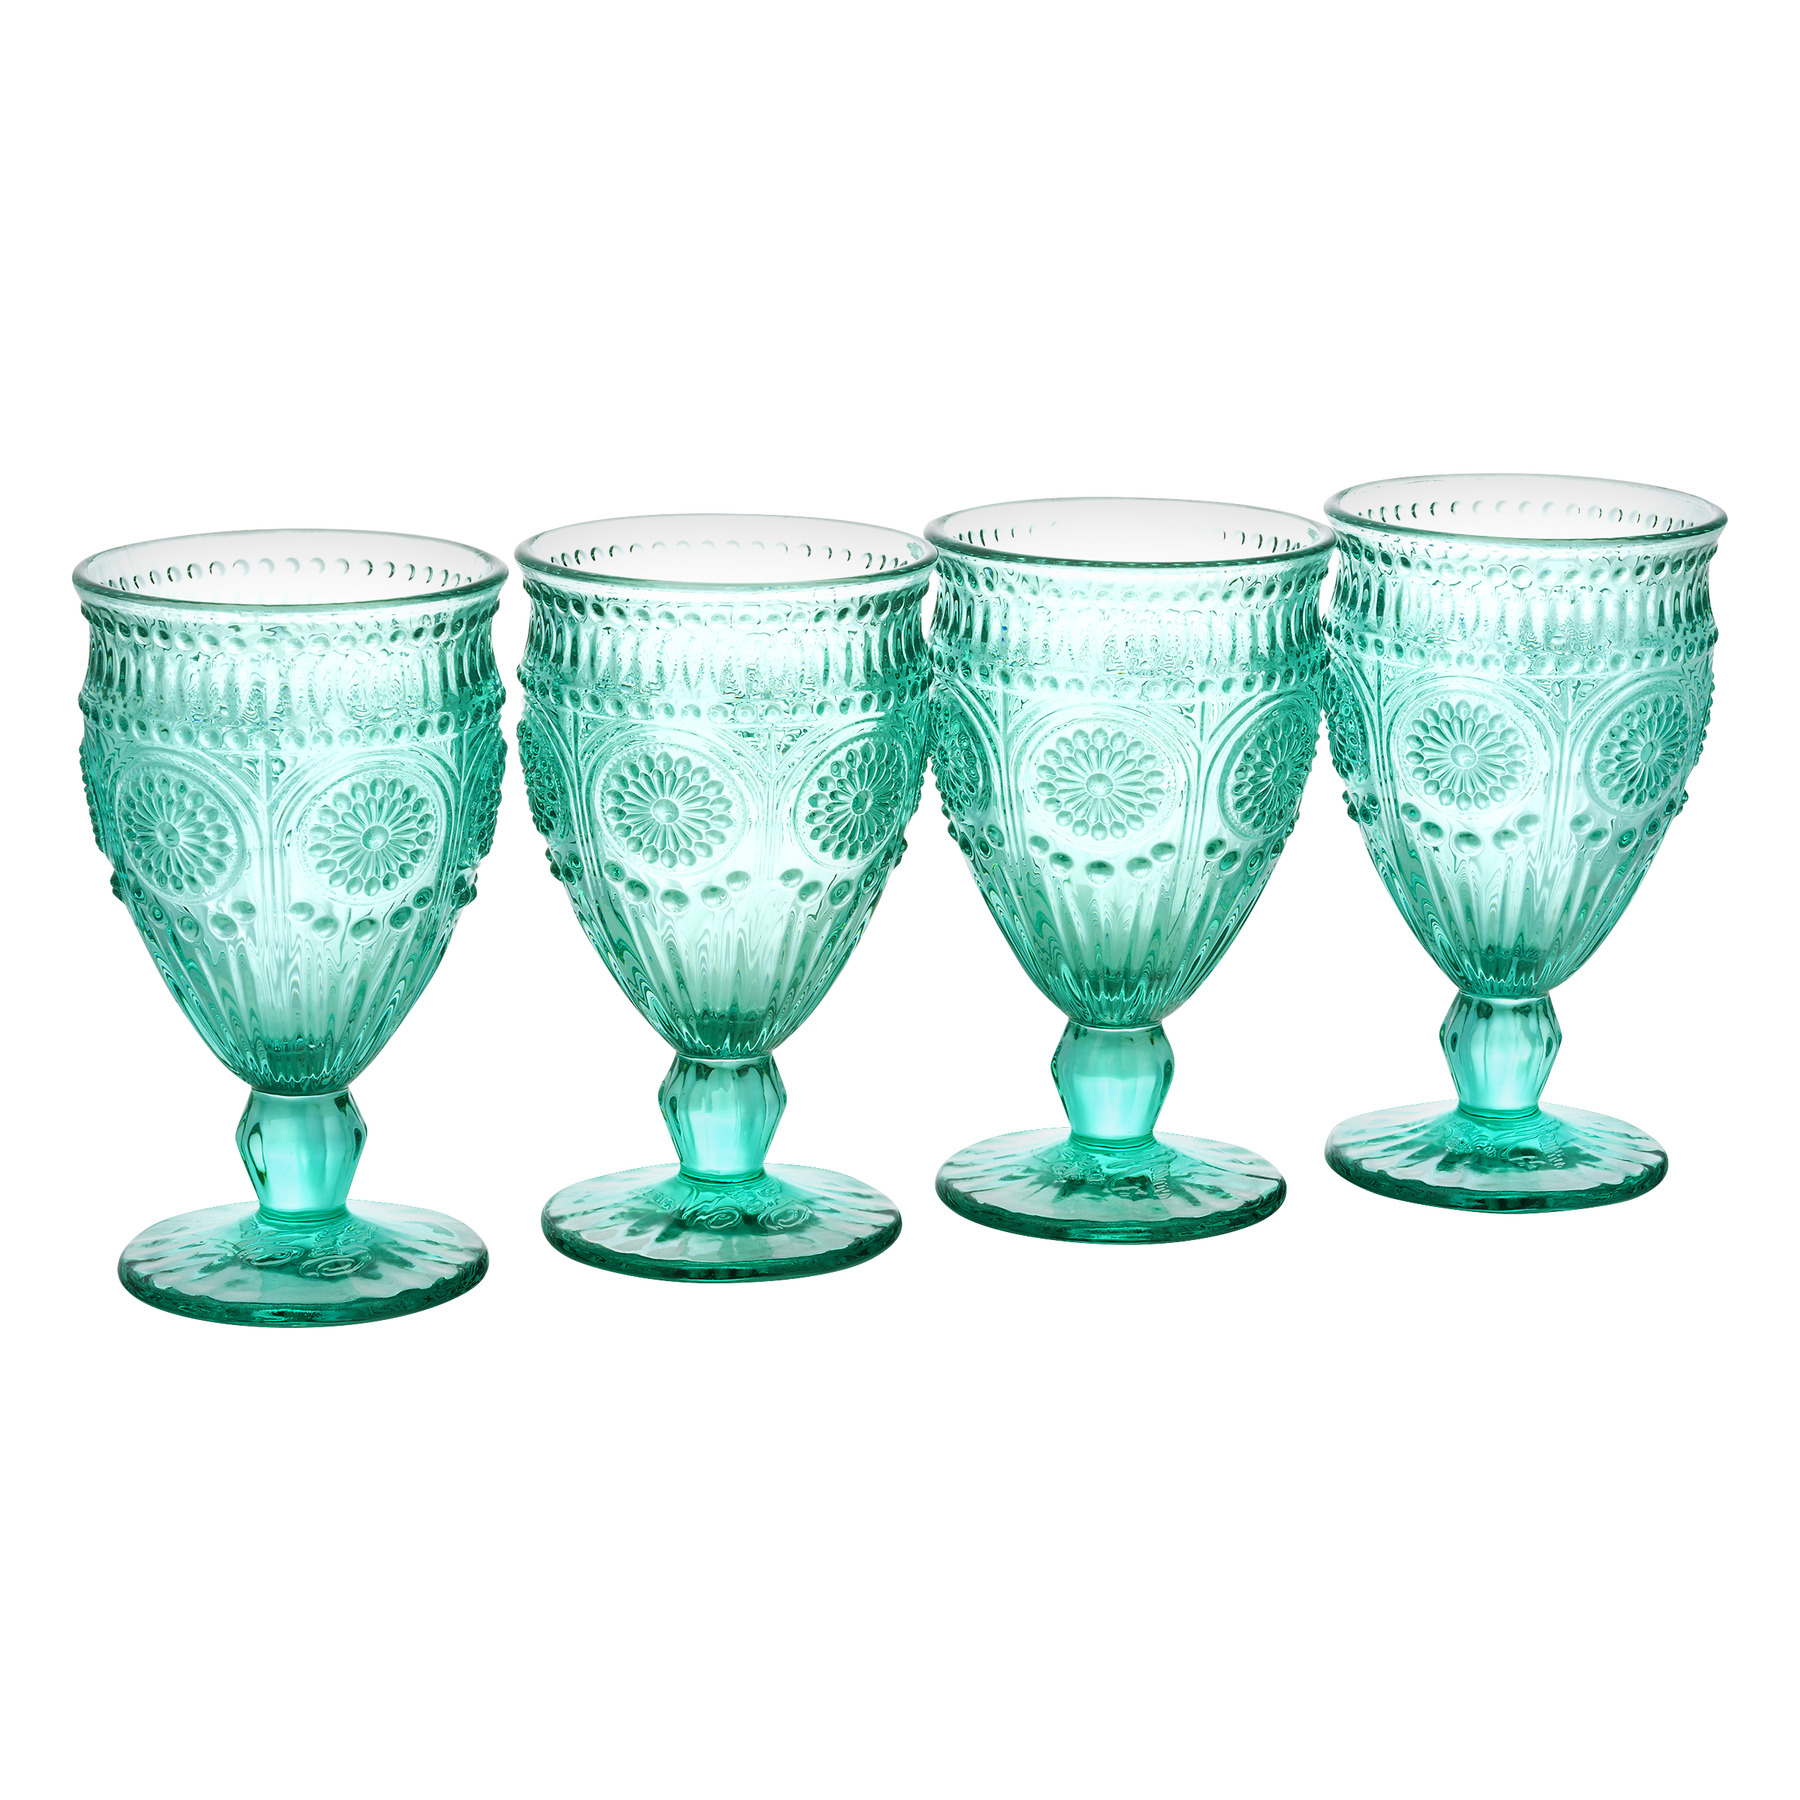 The Pioneer Woman Adeline 12-Ounce Footed Turquoise Glass Goblets, Set of 4 - image 4 of 5